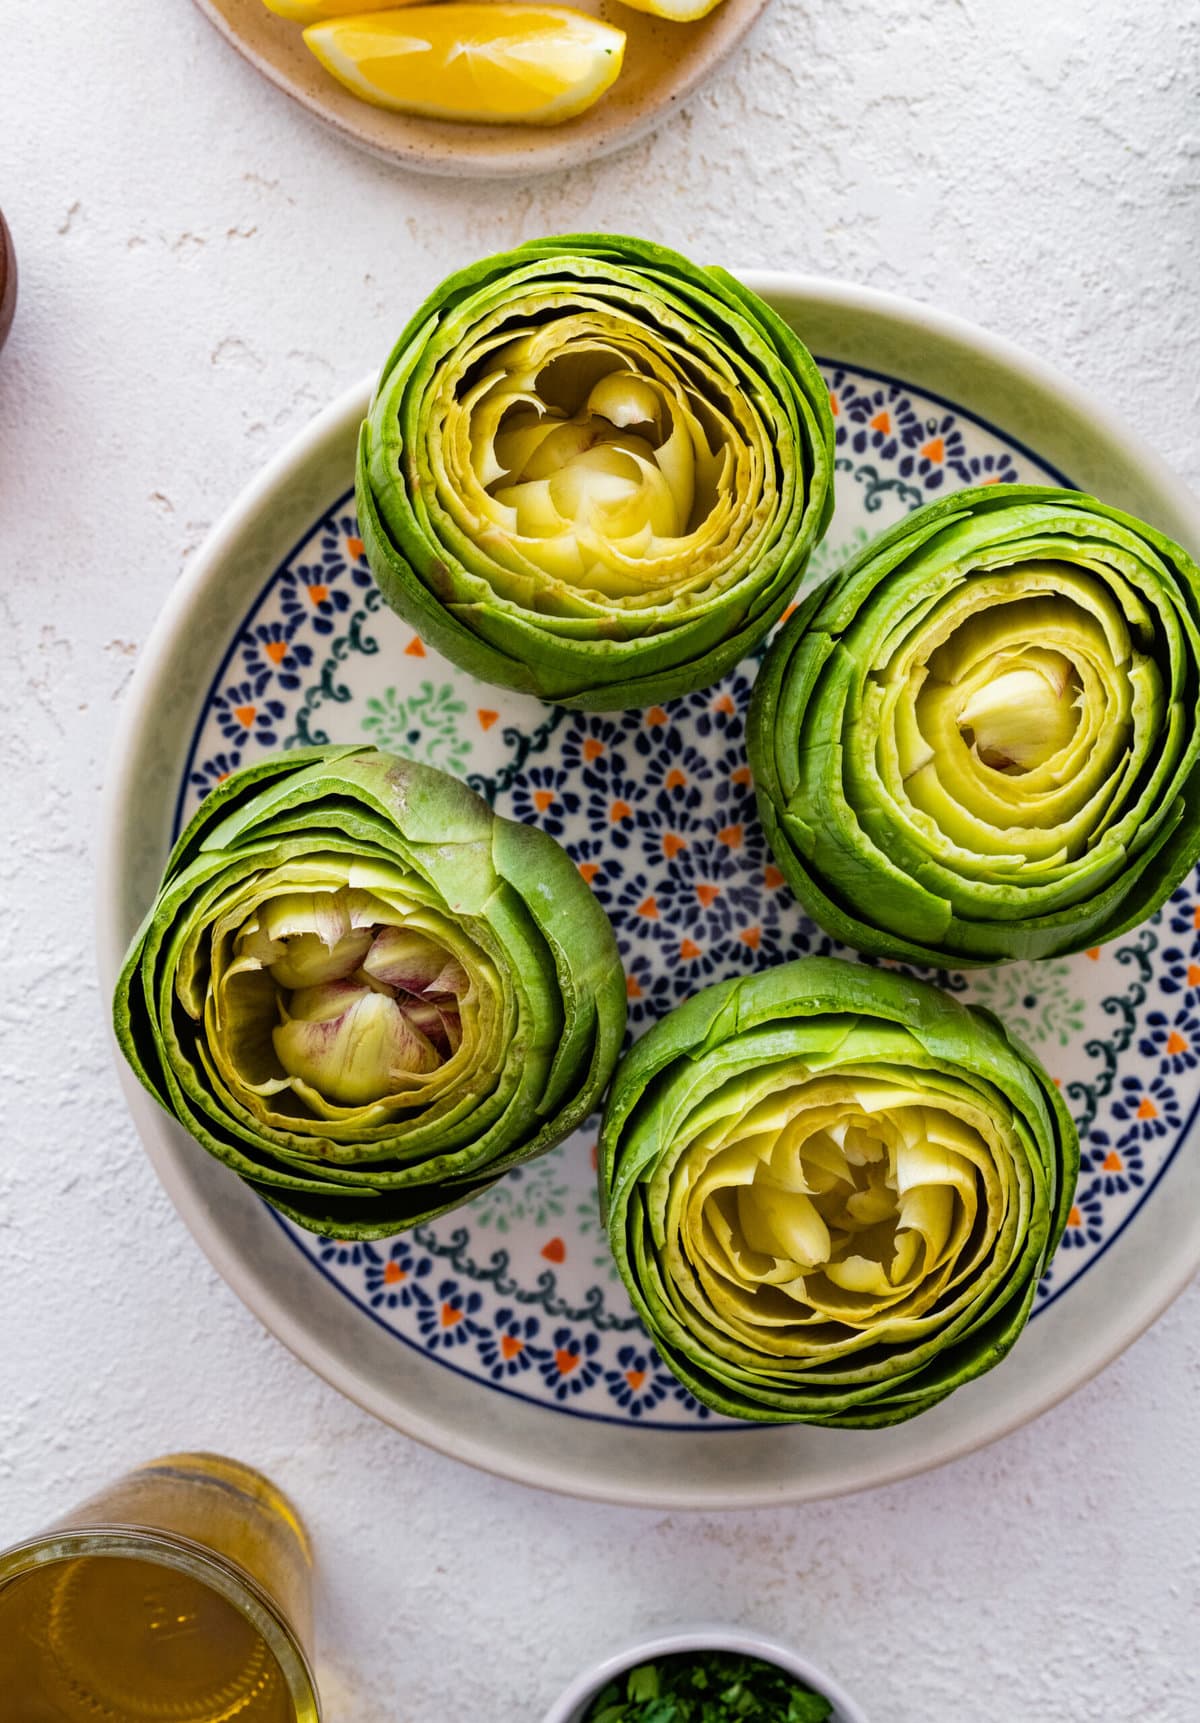 how to make stuffed artichokes step-by-step photos- taking off the outer layers of the artichoke.